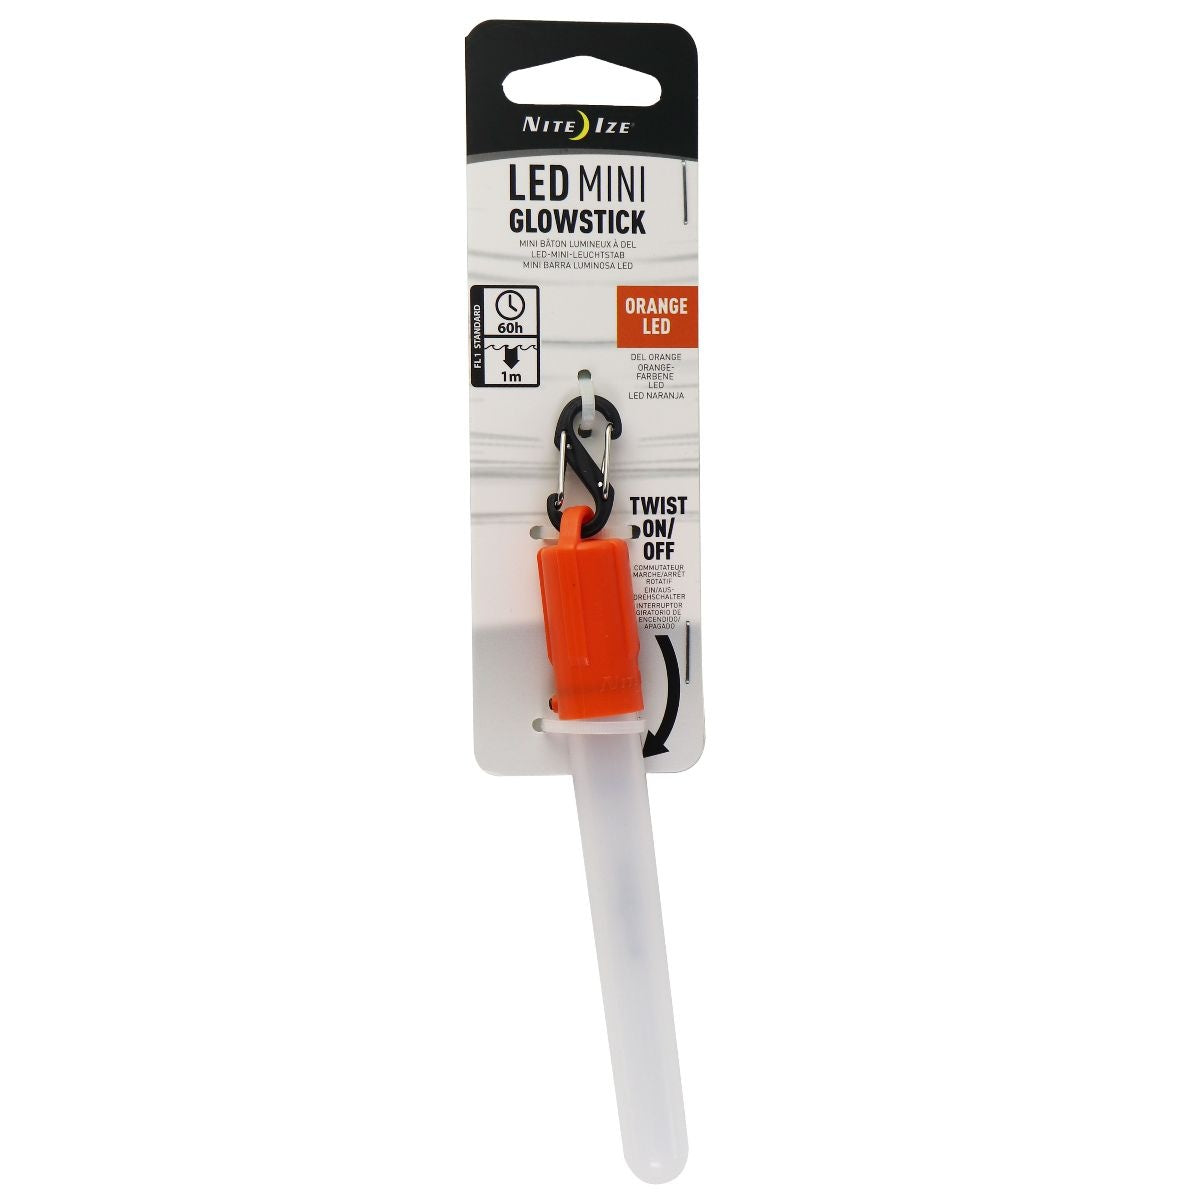 Nite Ize LED Mini Glowstick with Clip - Orange LED Other Sporting Goods Nite Ize    - Simple Cell Bulk Wholesale Pricing - USA Seller